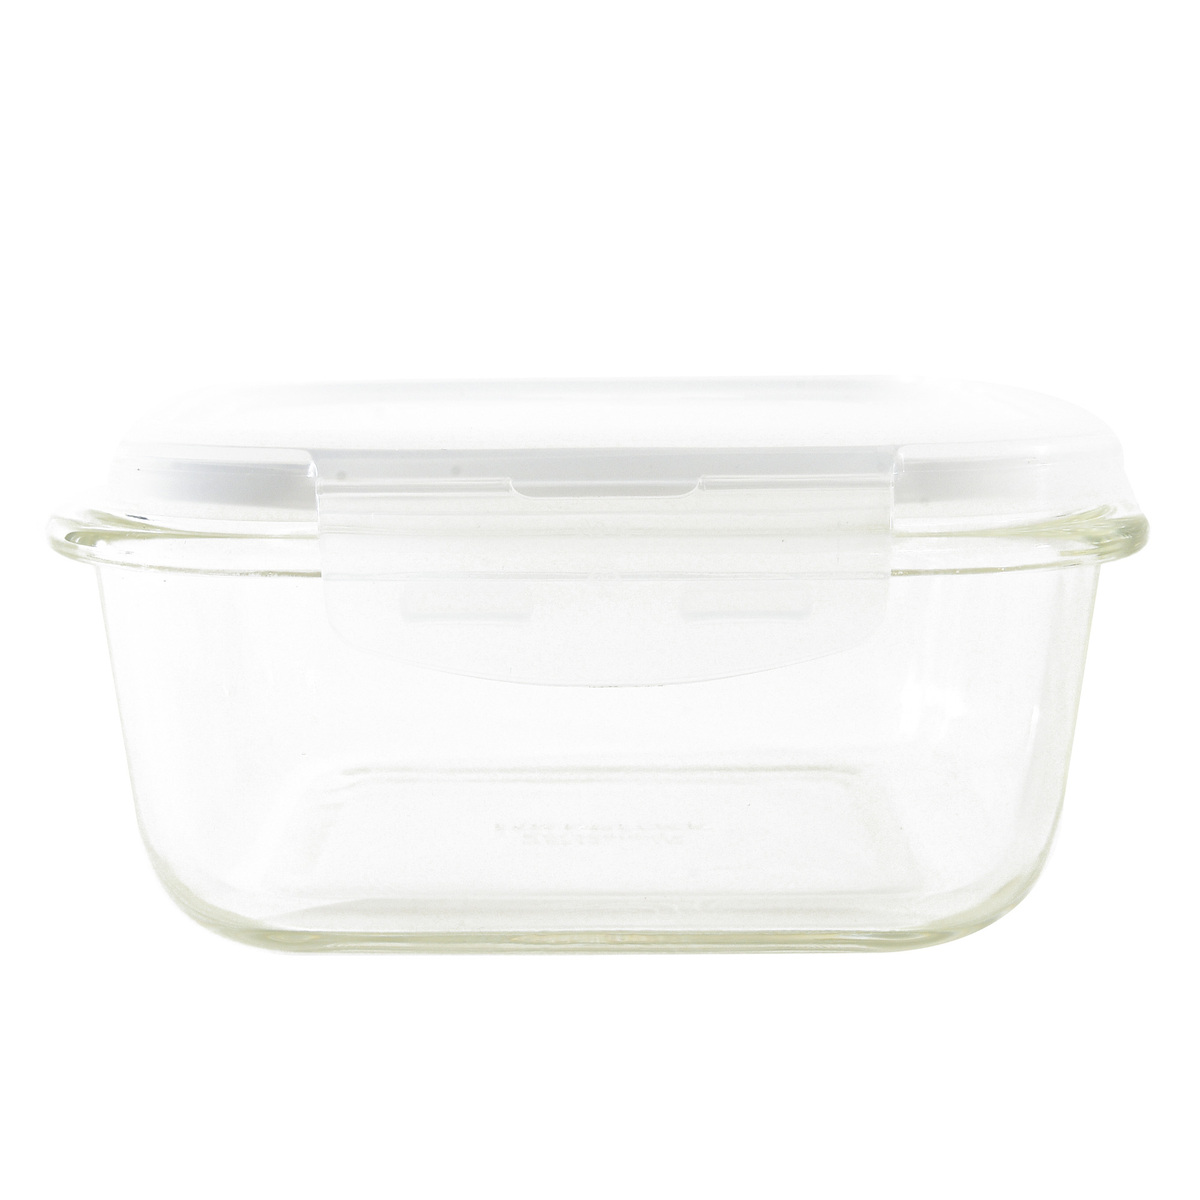 Lock & Lock Square Glass Container with Lid, 540 ml, Clear, LLG215